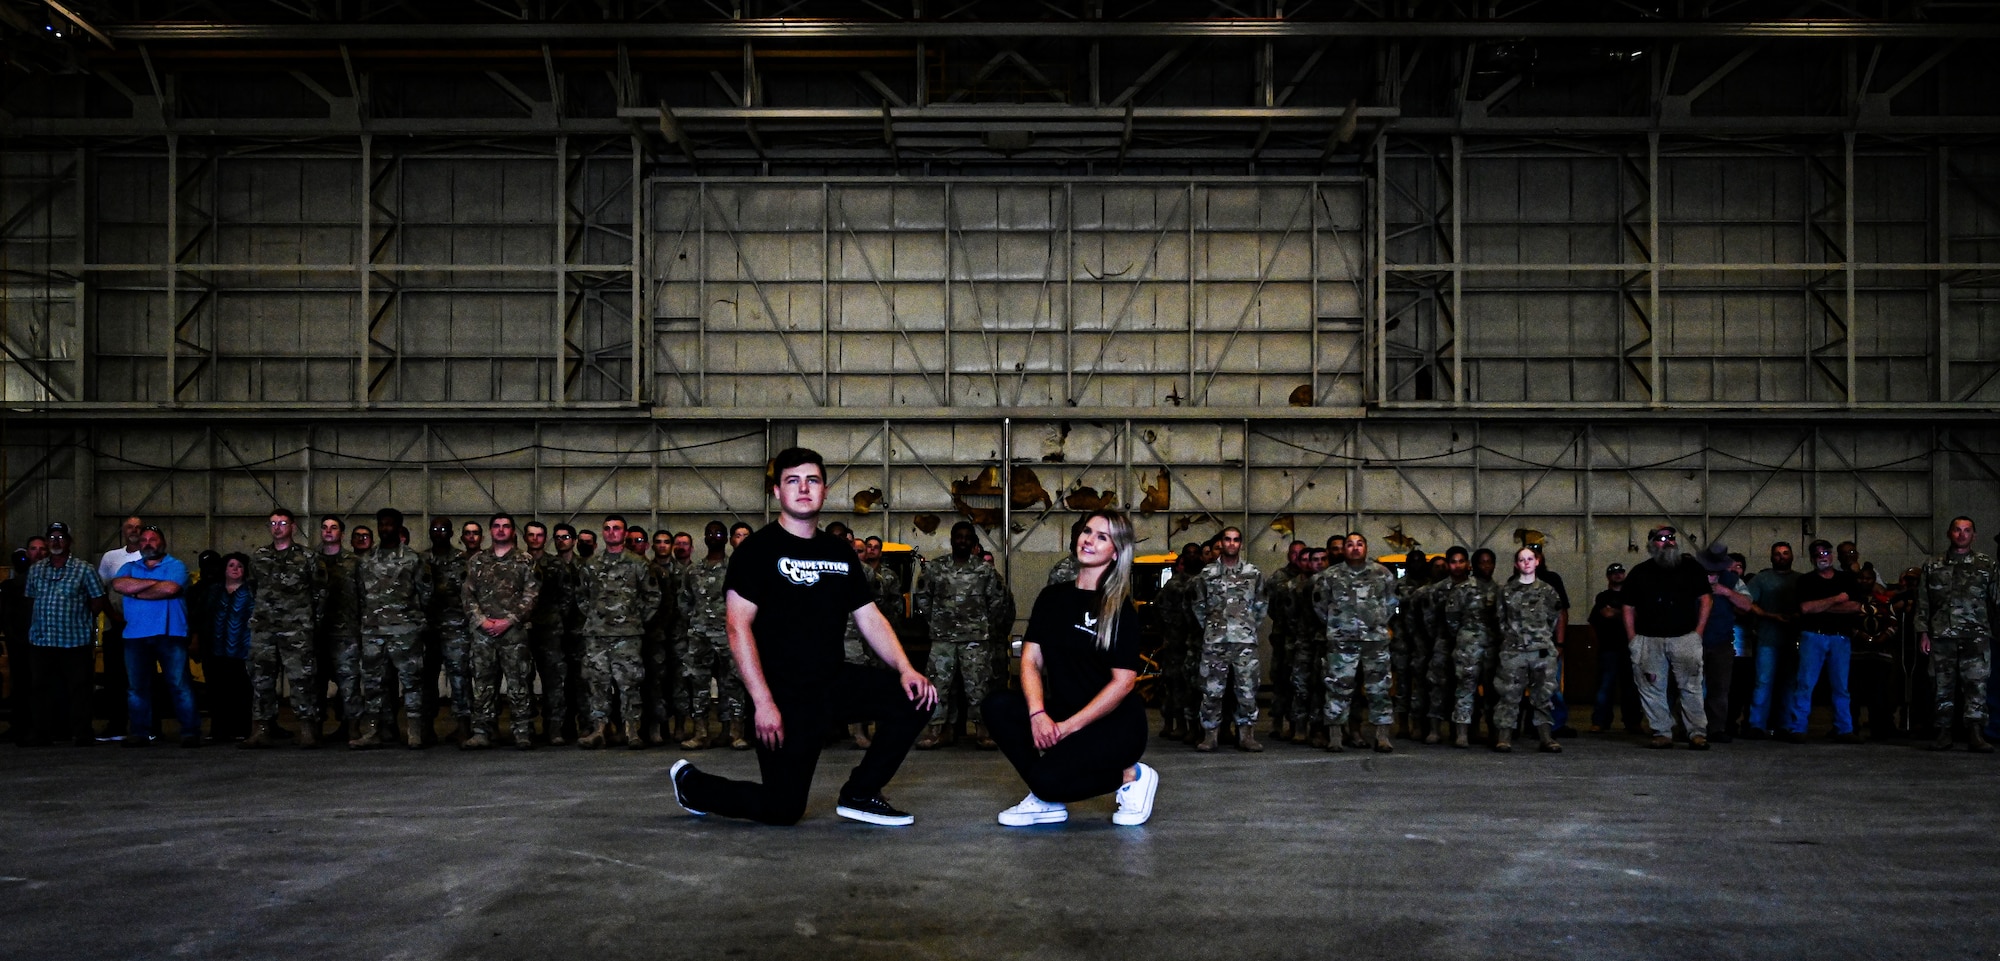 Formula Drift drivers Branden and Amanda Sorenson pose for a group photo with the 87th Civil Engineering Squadron at Joint Base McGuire-Dix-Lakehurst on June 7, 2022. Drift team duo Branden and Amanda Sorensen visited JB MDL to interact with Airmen and learn about different Air Force career fields. Air Force Recruiting Service recently continued their 13-year partnership with the Formula Drift series. Throughout the 2022 Formula Drift circuit, the Air Force will serve as the primary sponsor for the Sorensen Motorsports team.